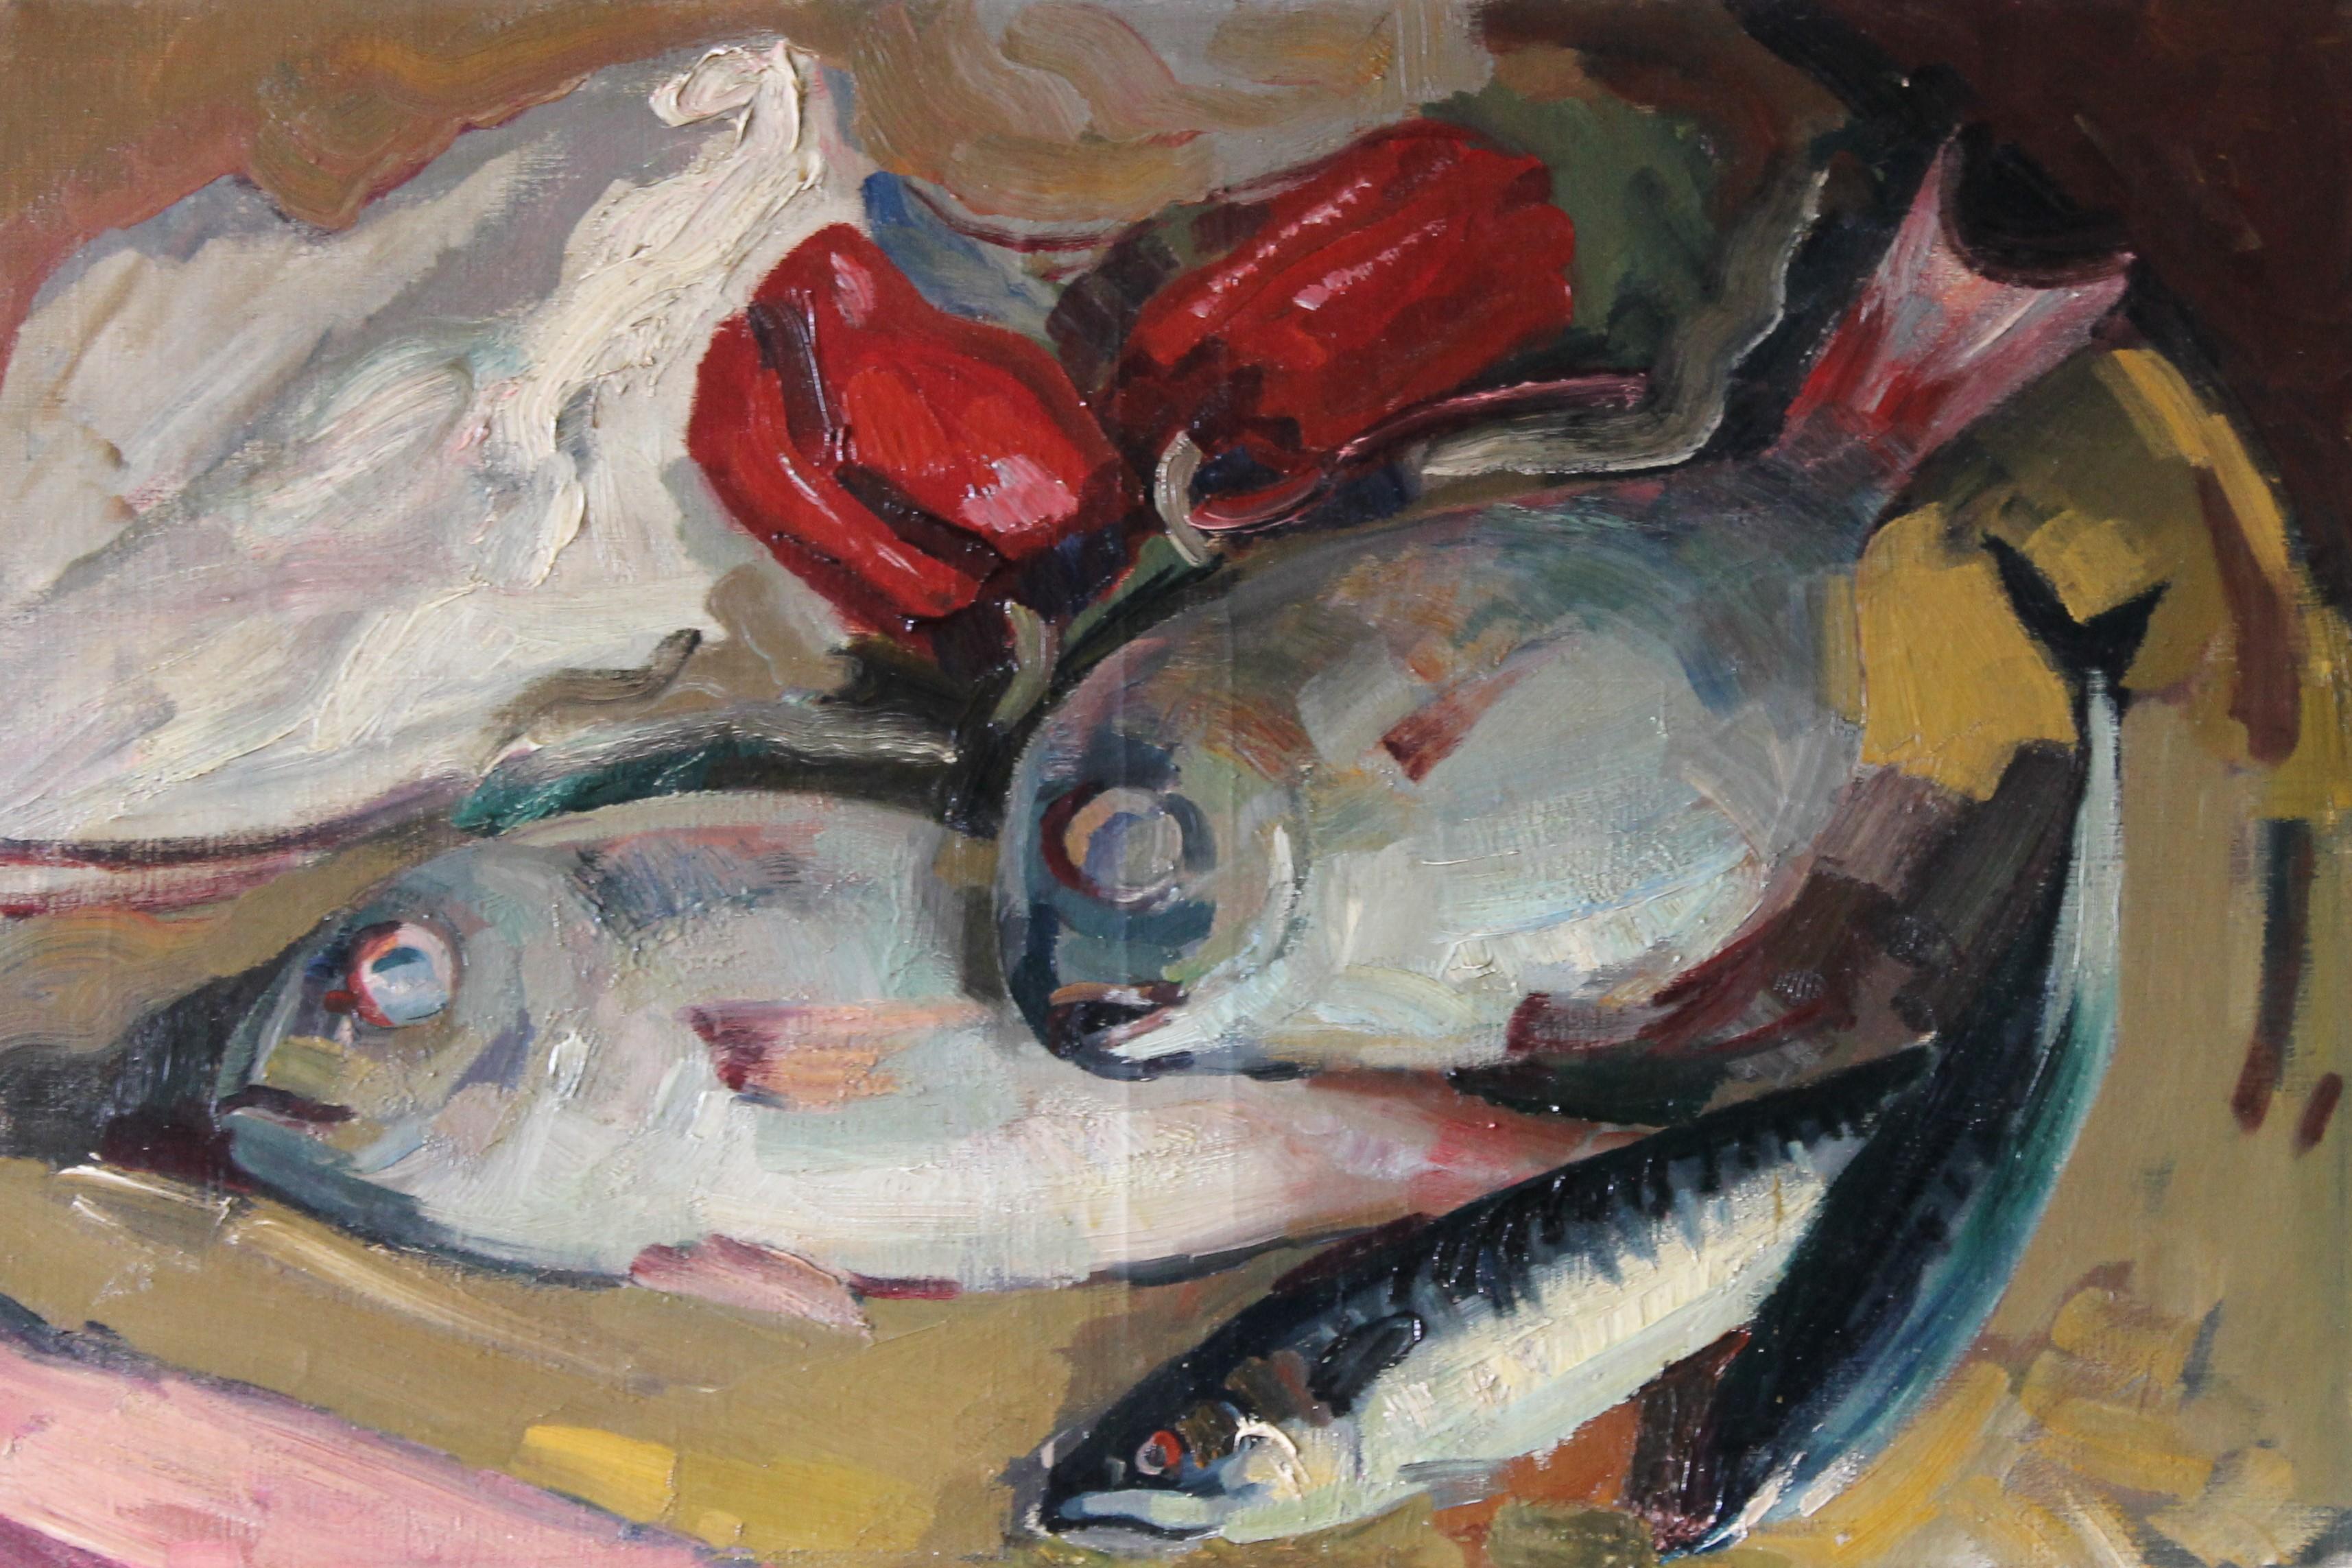  Francois Mengalatte Still-Life Painting - Fish Still Life Oil painting, Impressionist fish, sea bream and red peppers